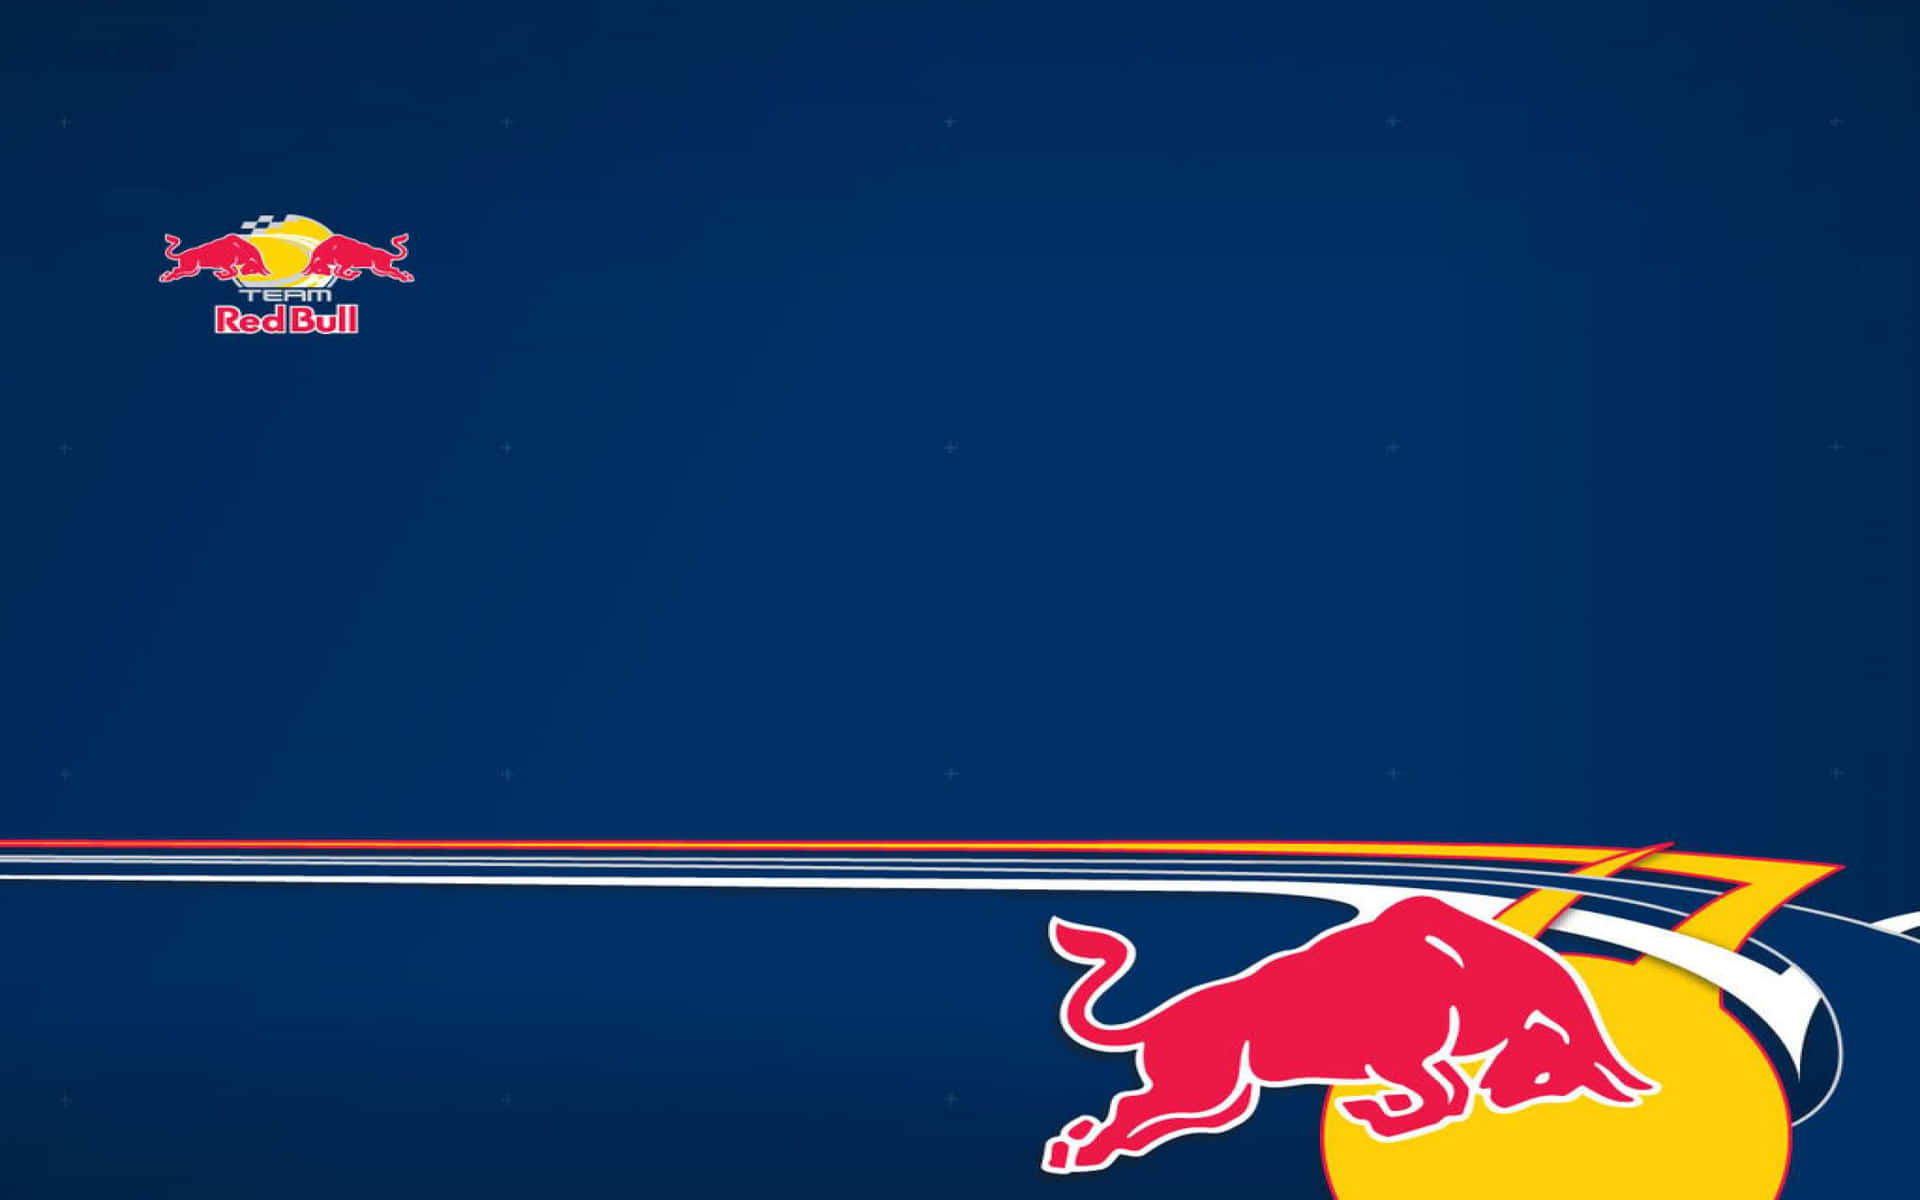 Experience the power of Red Bull